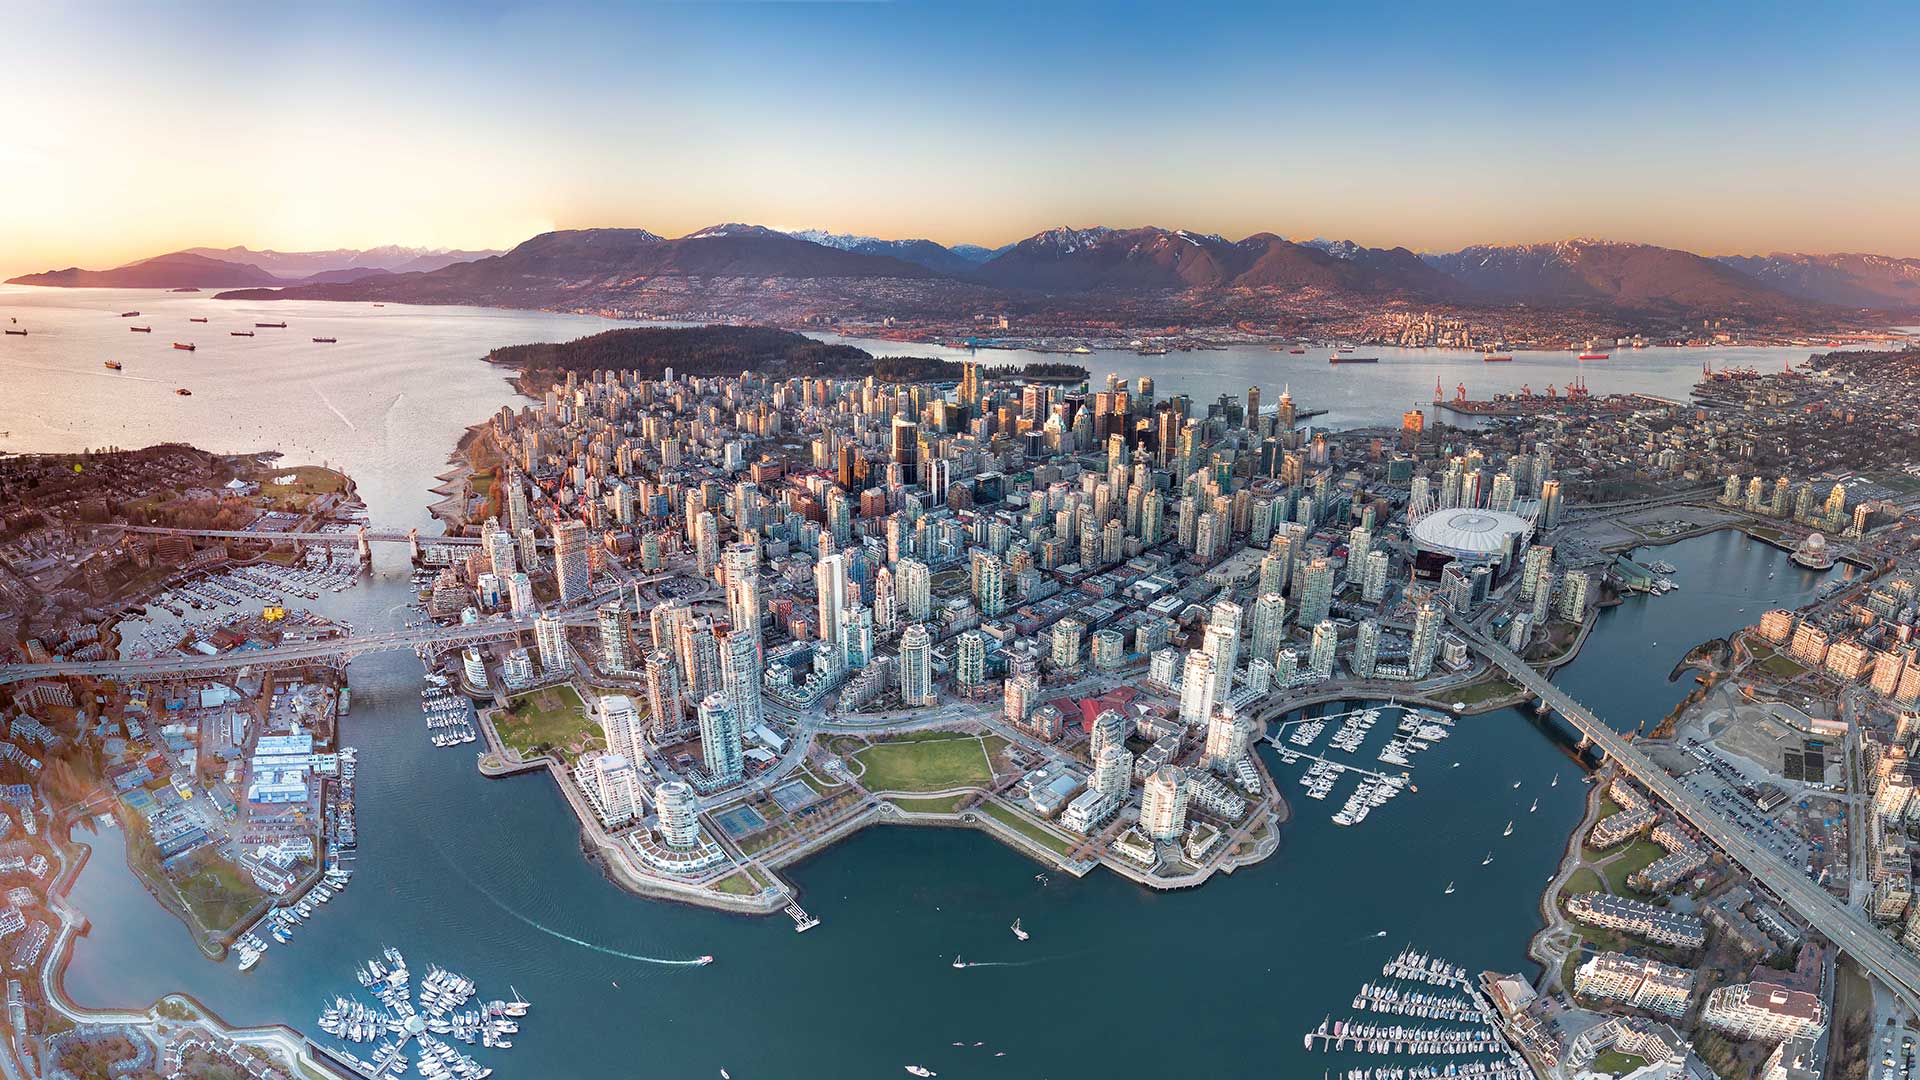 Panorama to illustrate dating in vancouver